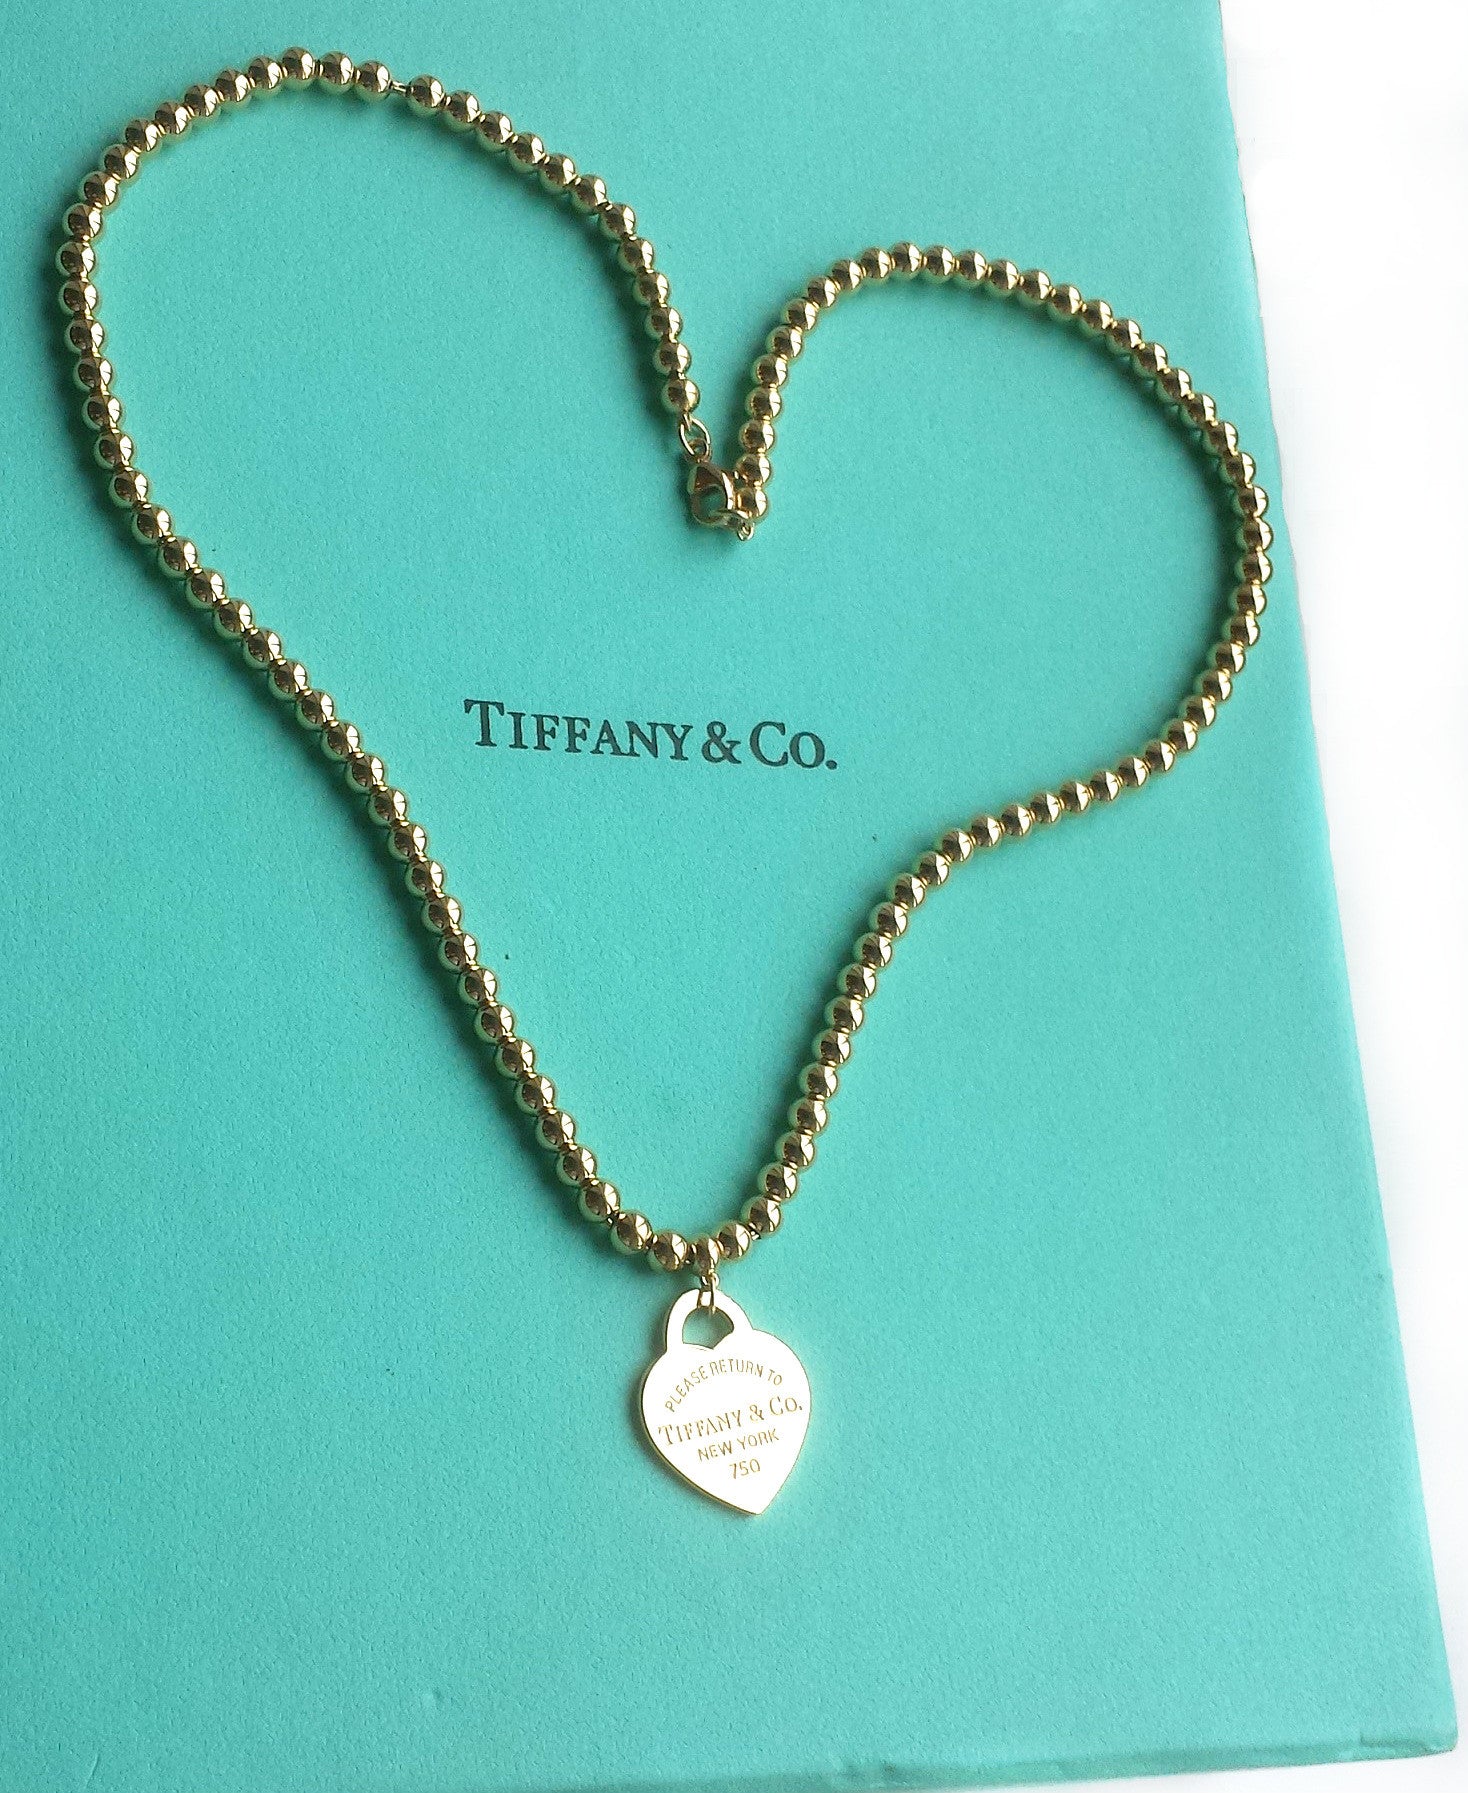 Tiffany & Co. Return to™ 18k Yellow Gold Small Bead Necklace with Hear